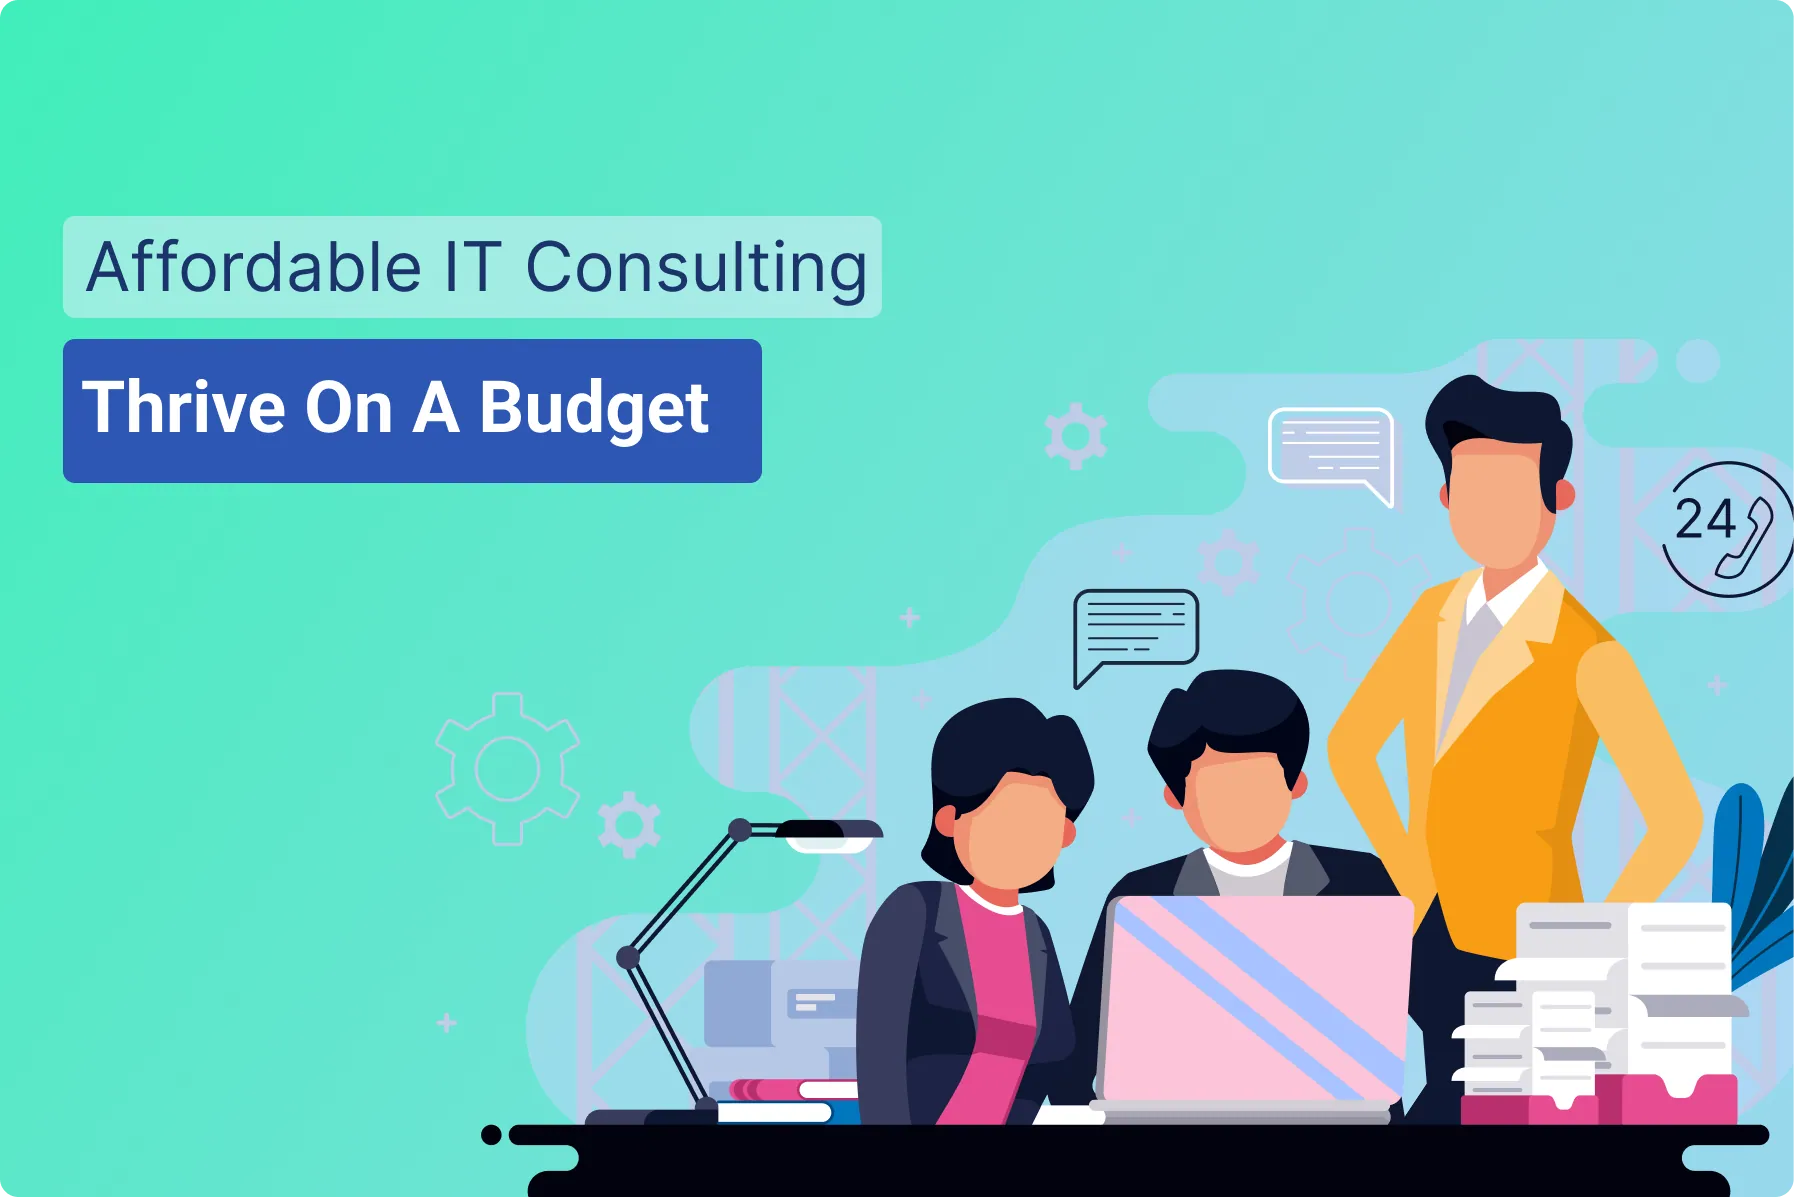 Affordable IT Consulting_ Thrive on a Budget